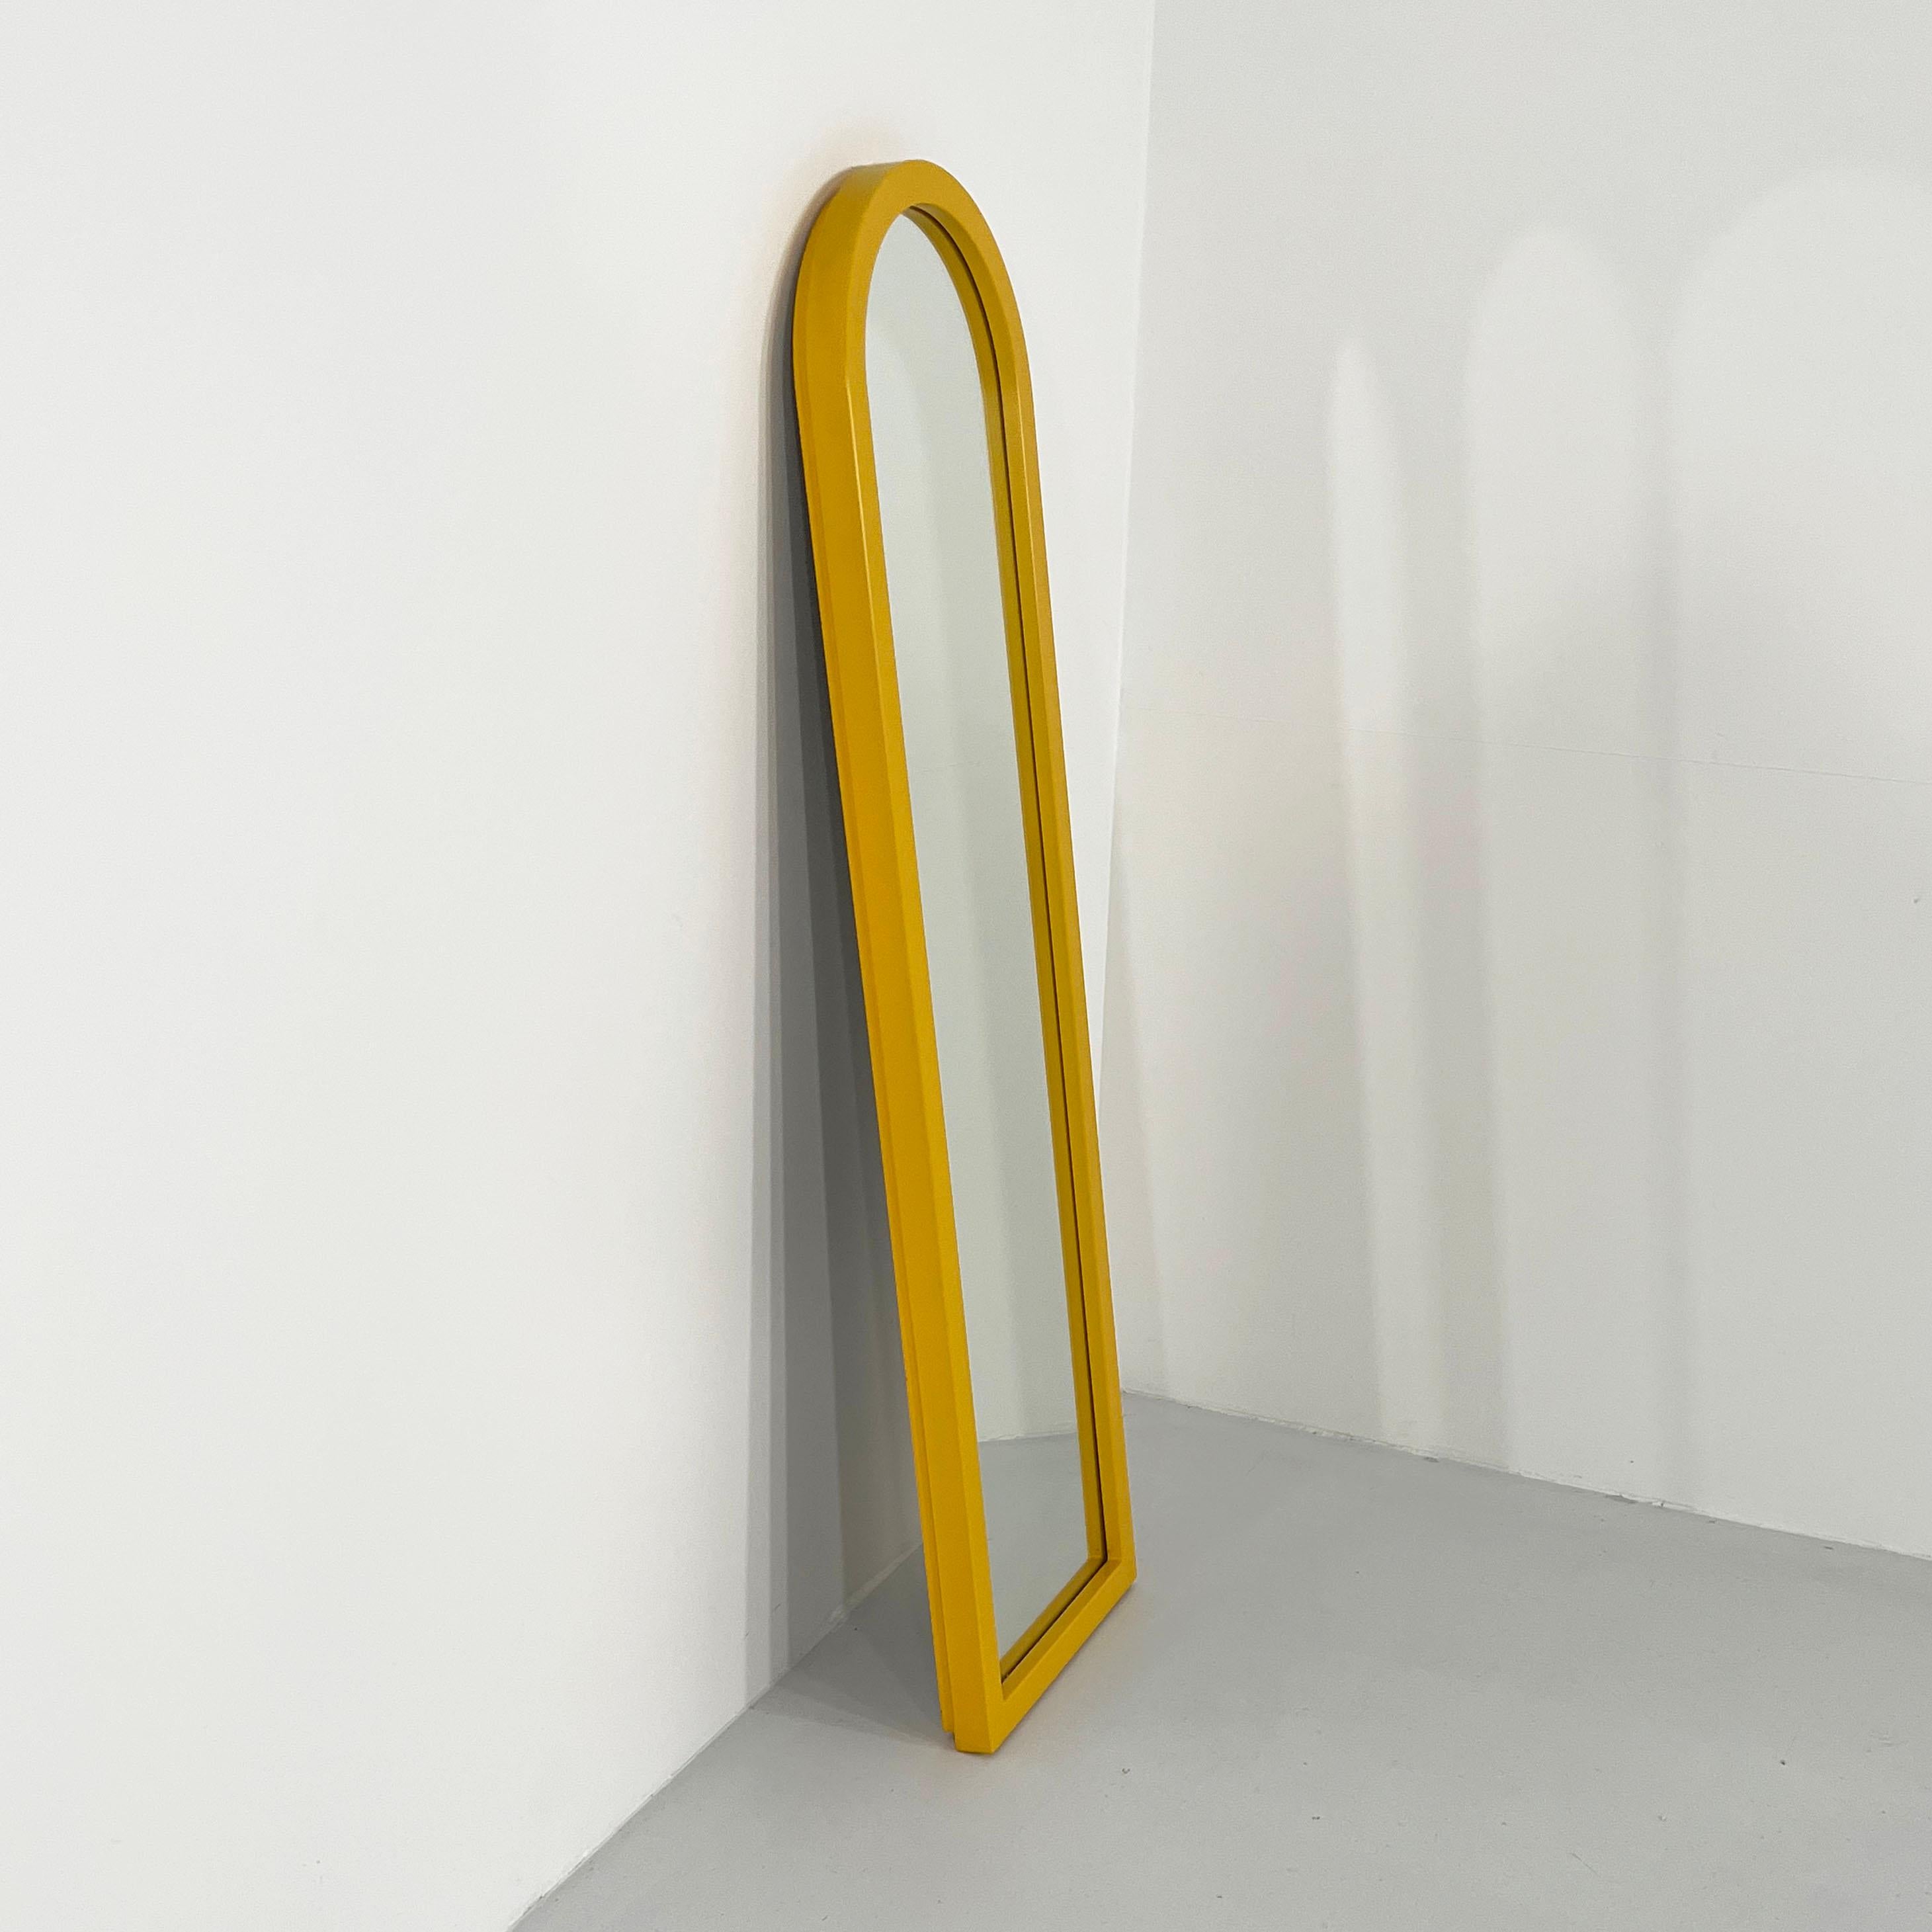 Late 20th Century Yellow Frame Mirror by Anna Castelli Ferrieri for Kartell, 1980s